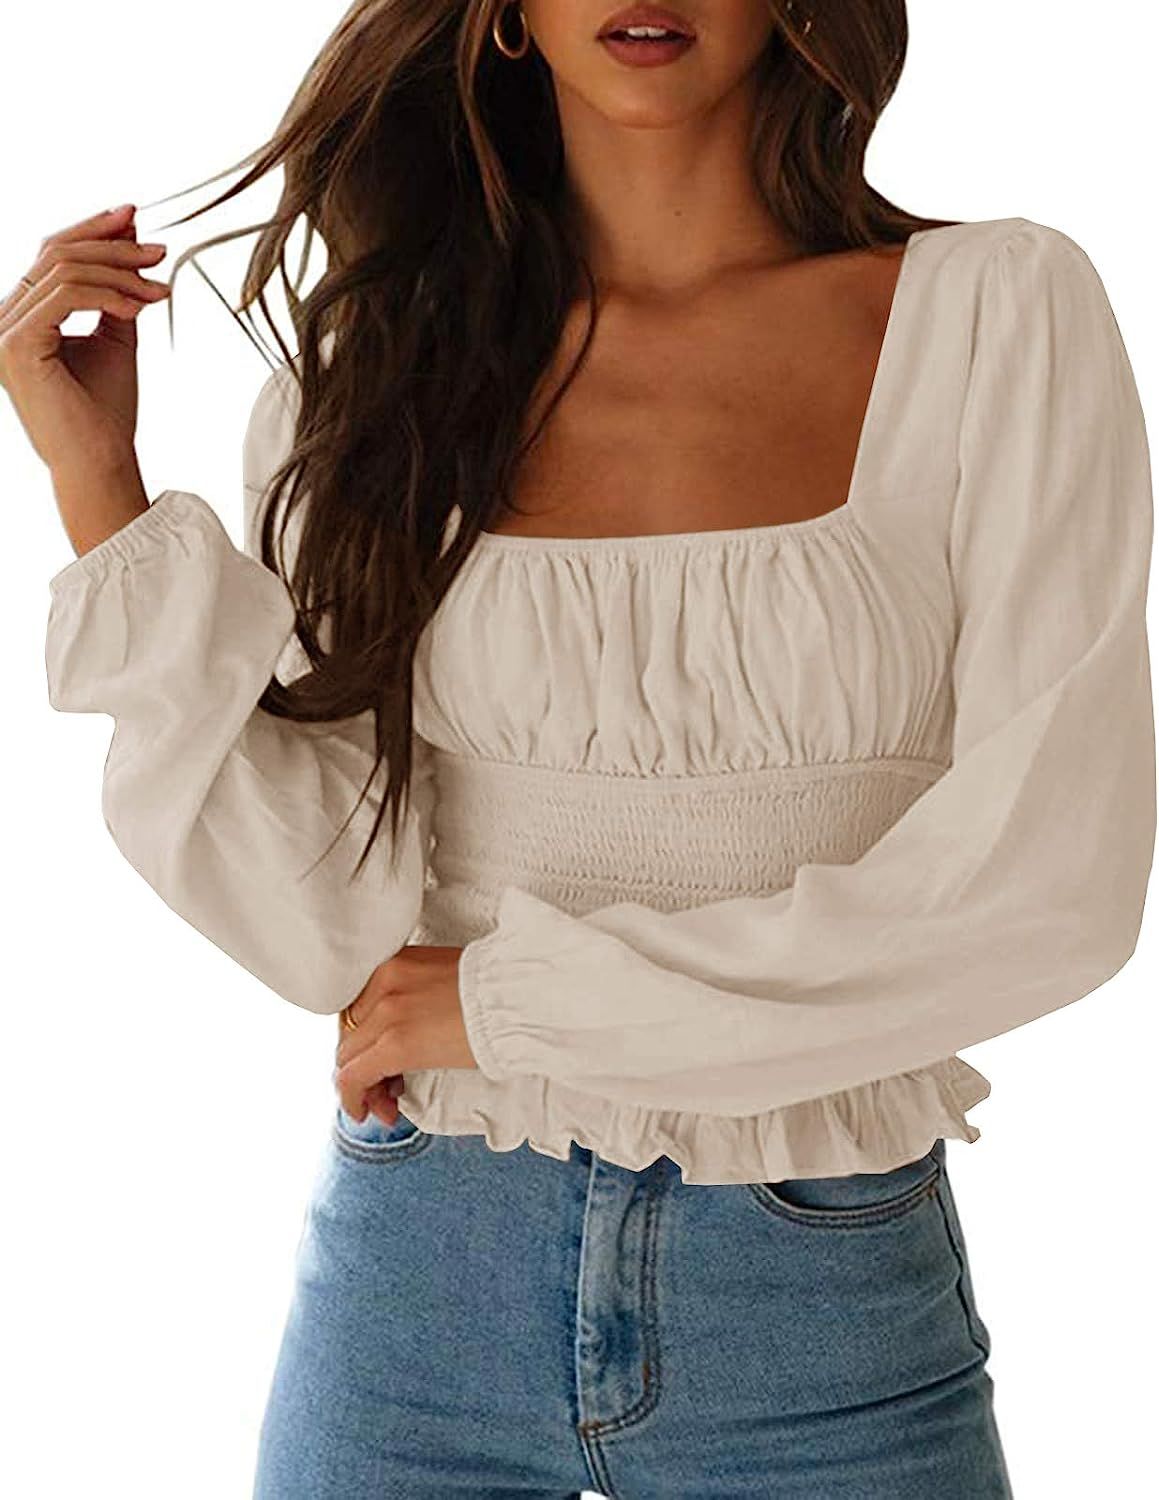 CNJFJ Women's Sexy Frill Smock Crop Top Retro Square Neck Long Sleeve Shirred Blouse Tops | Amazon (US)